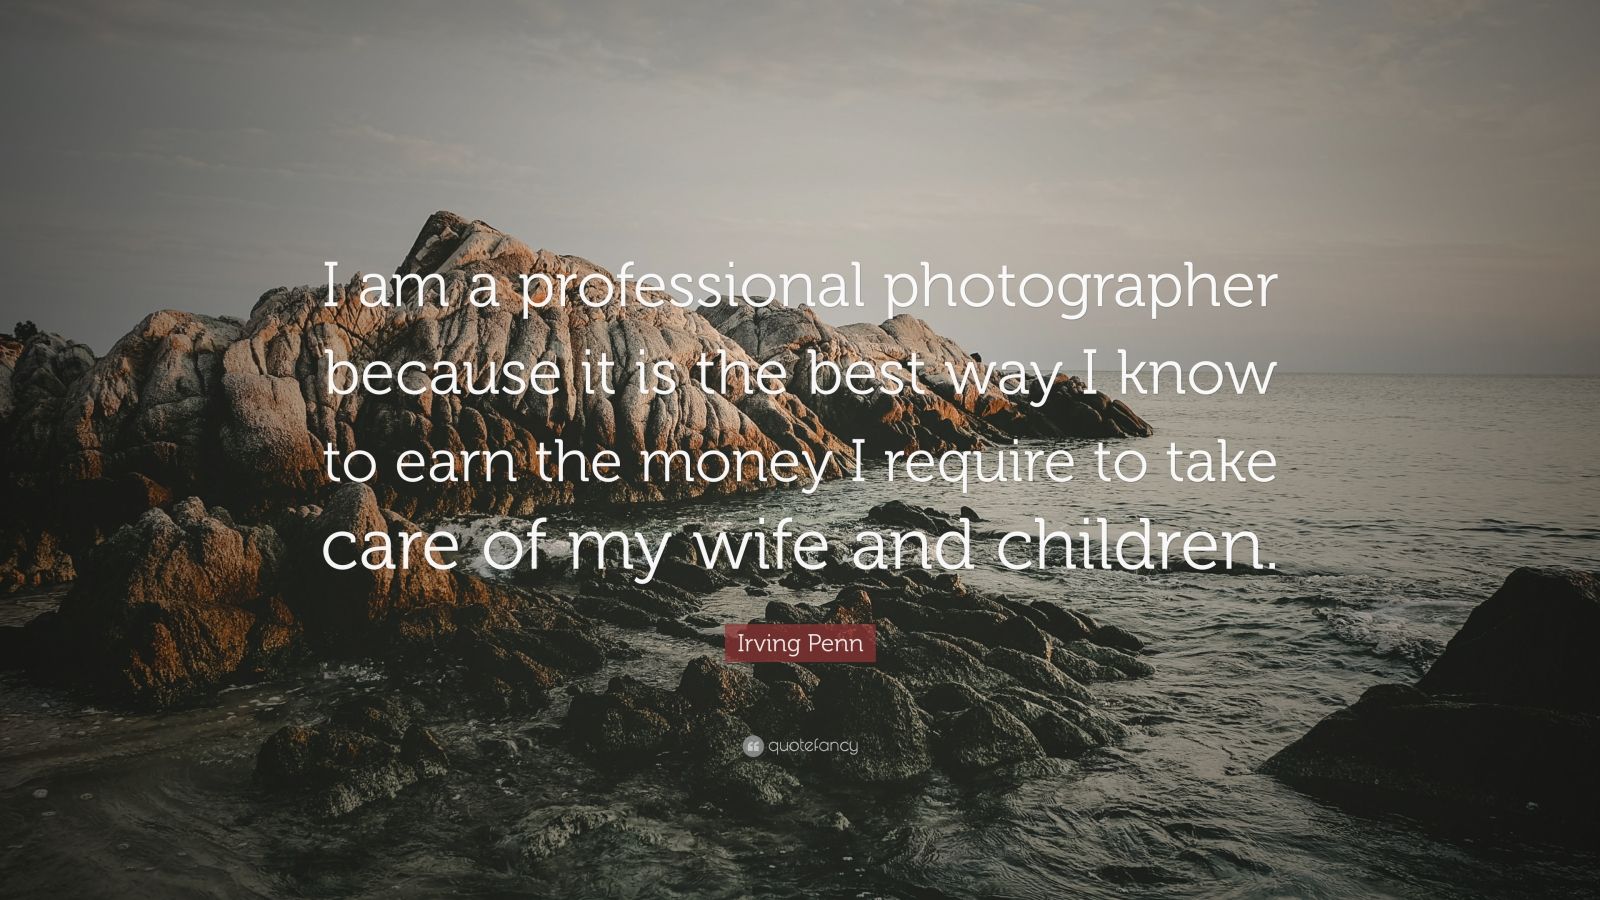 Irving Penn Quote: “I am a professional photographer because it is the ...